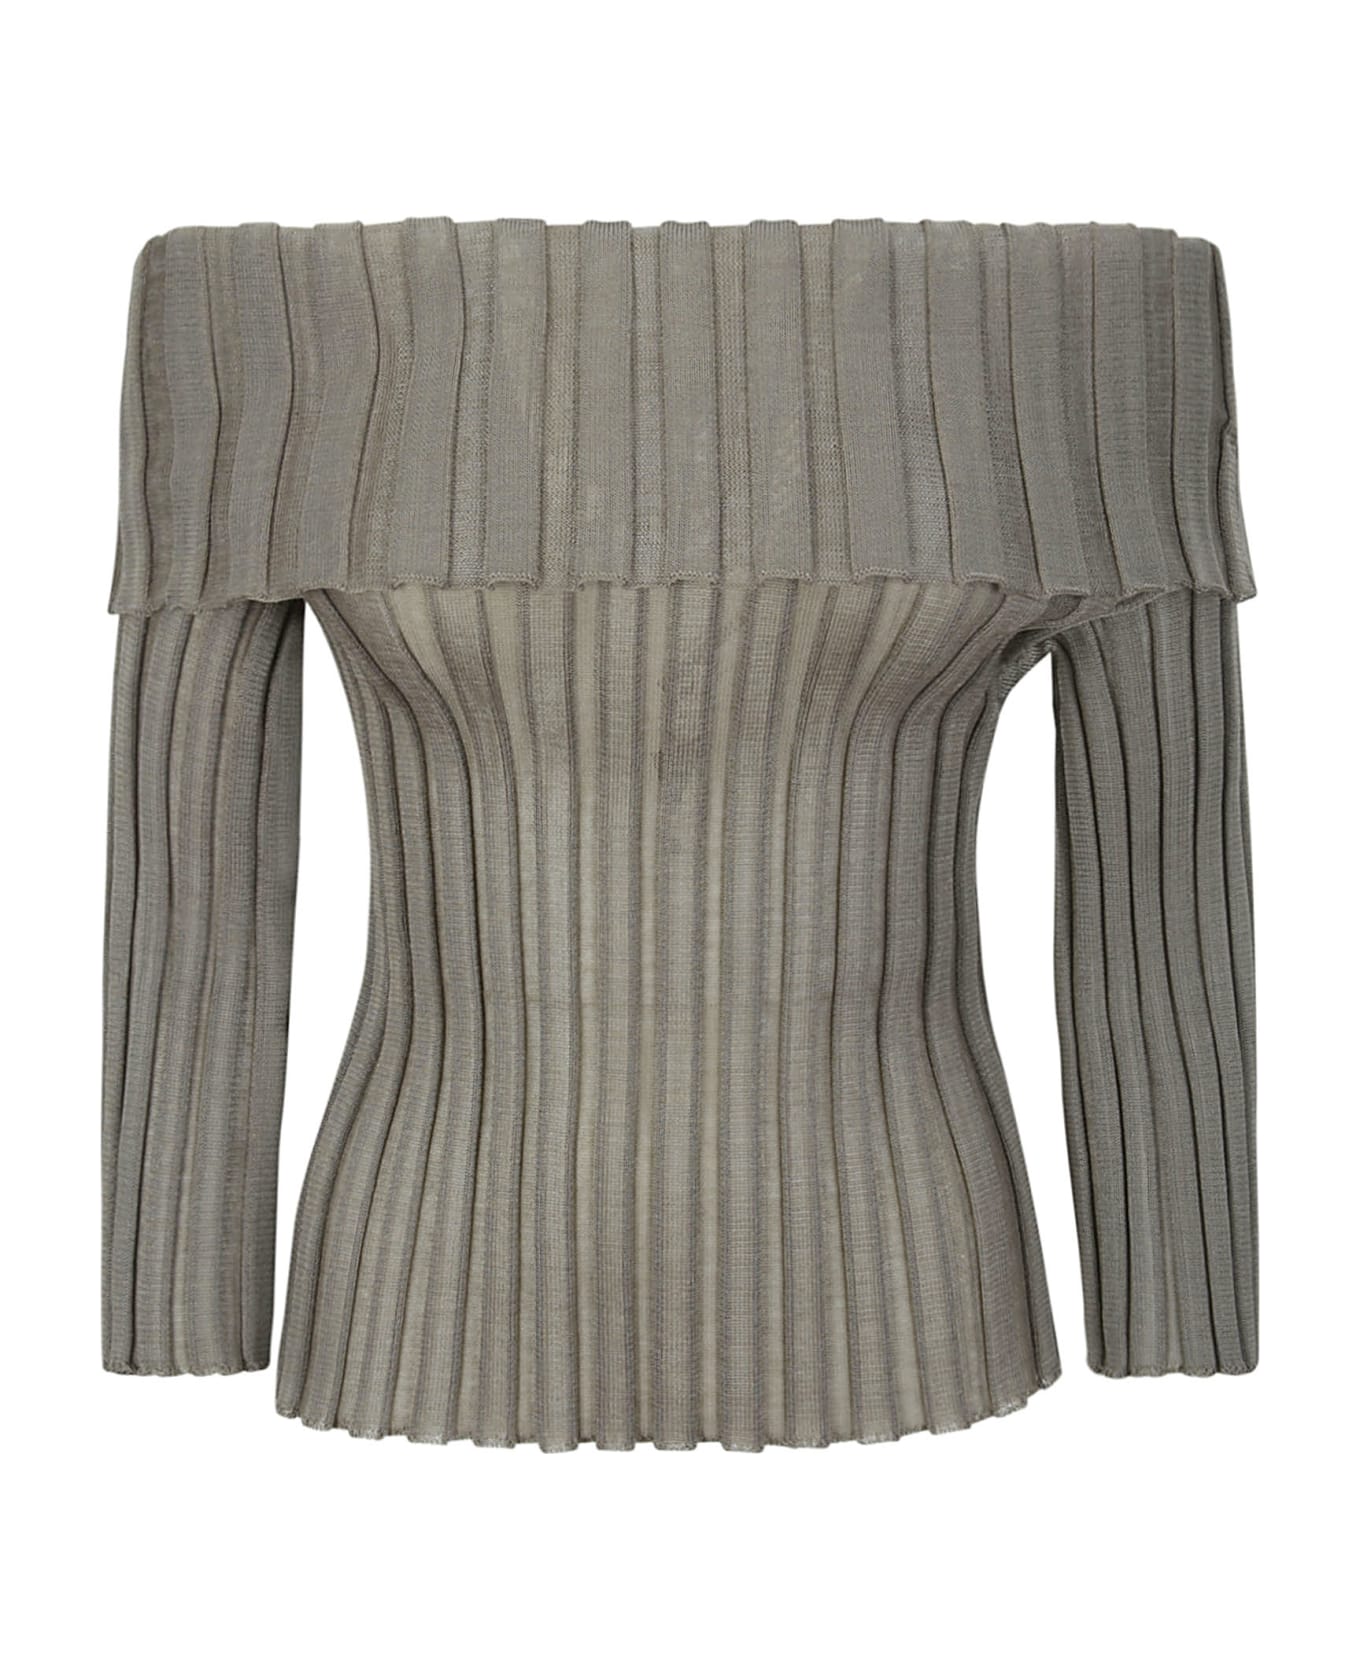 A. Roege Hove Katrine Fold-over Top - TAUPE